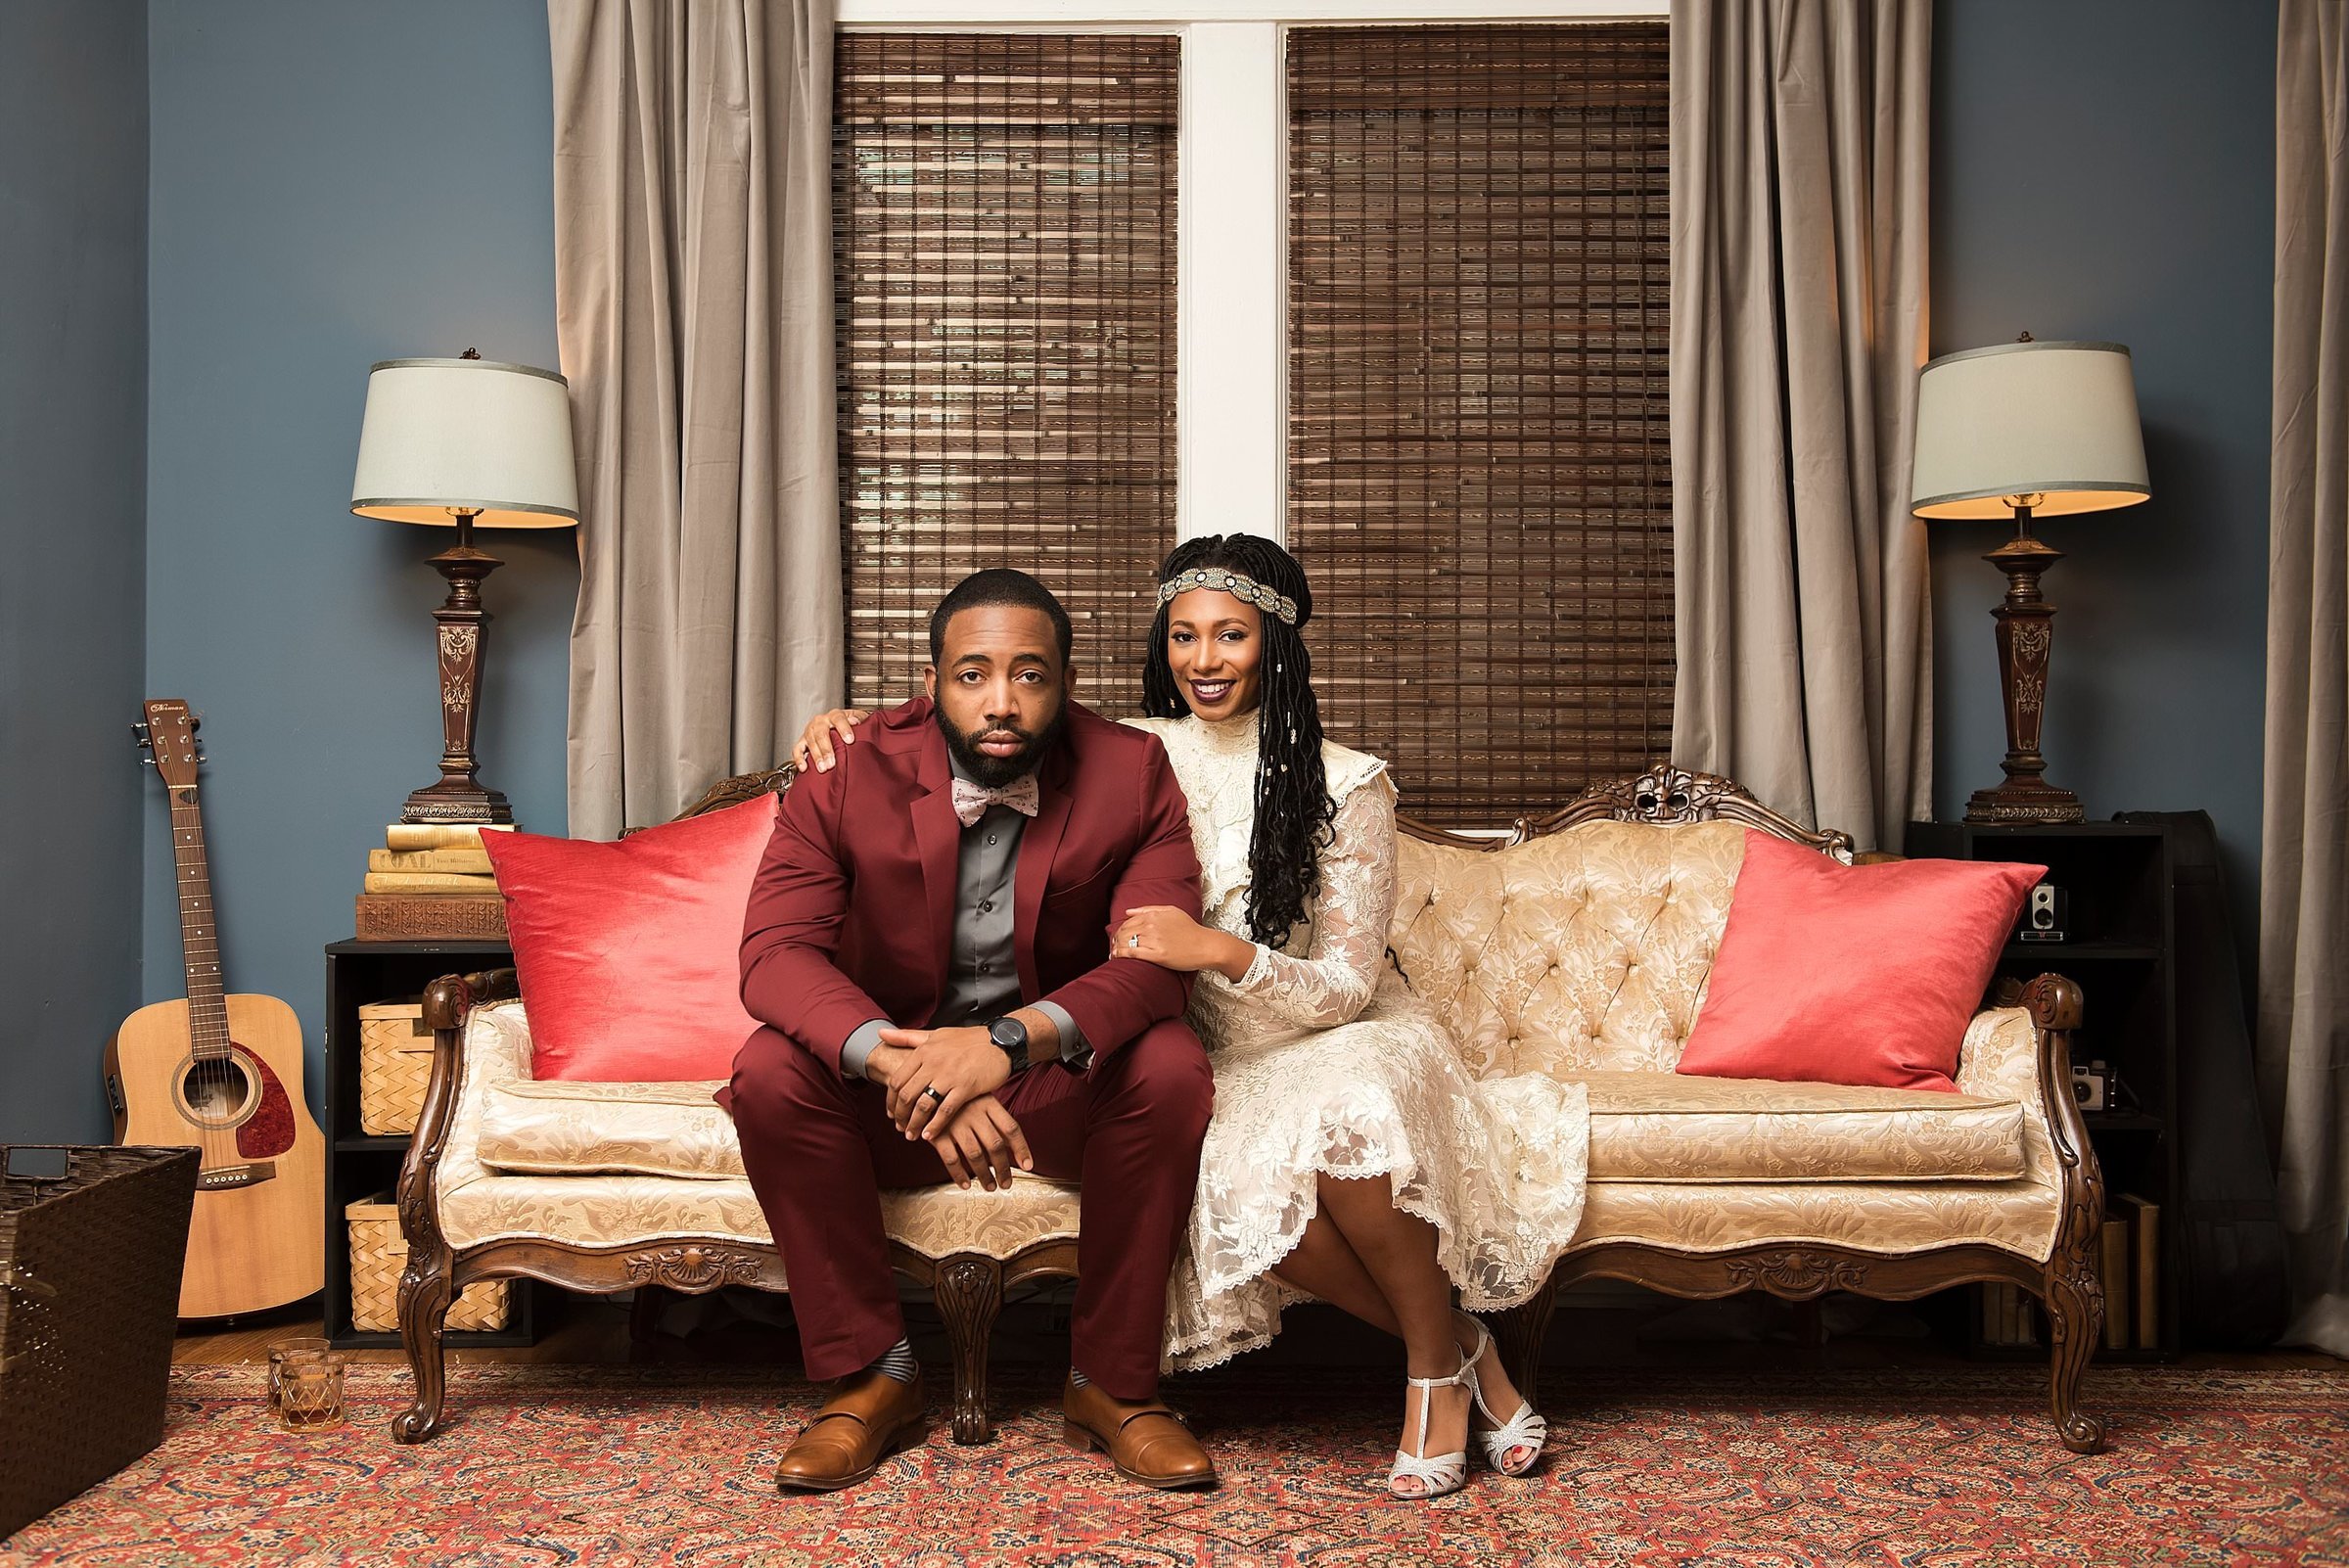 Couple sitting on a vintage couch in living room, he is wearing a retro maroon suit and she has a vintage wedding dress on